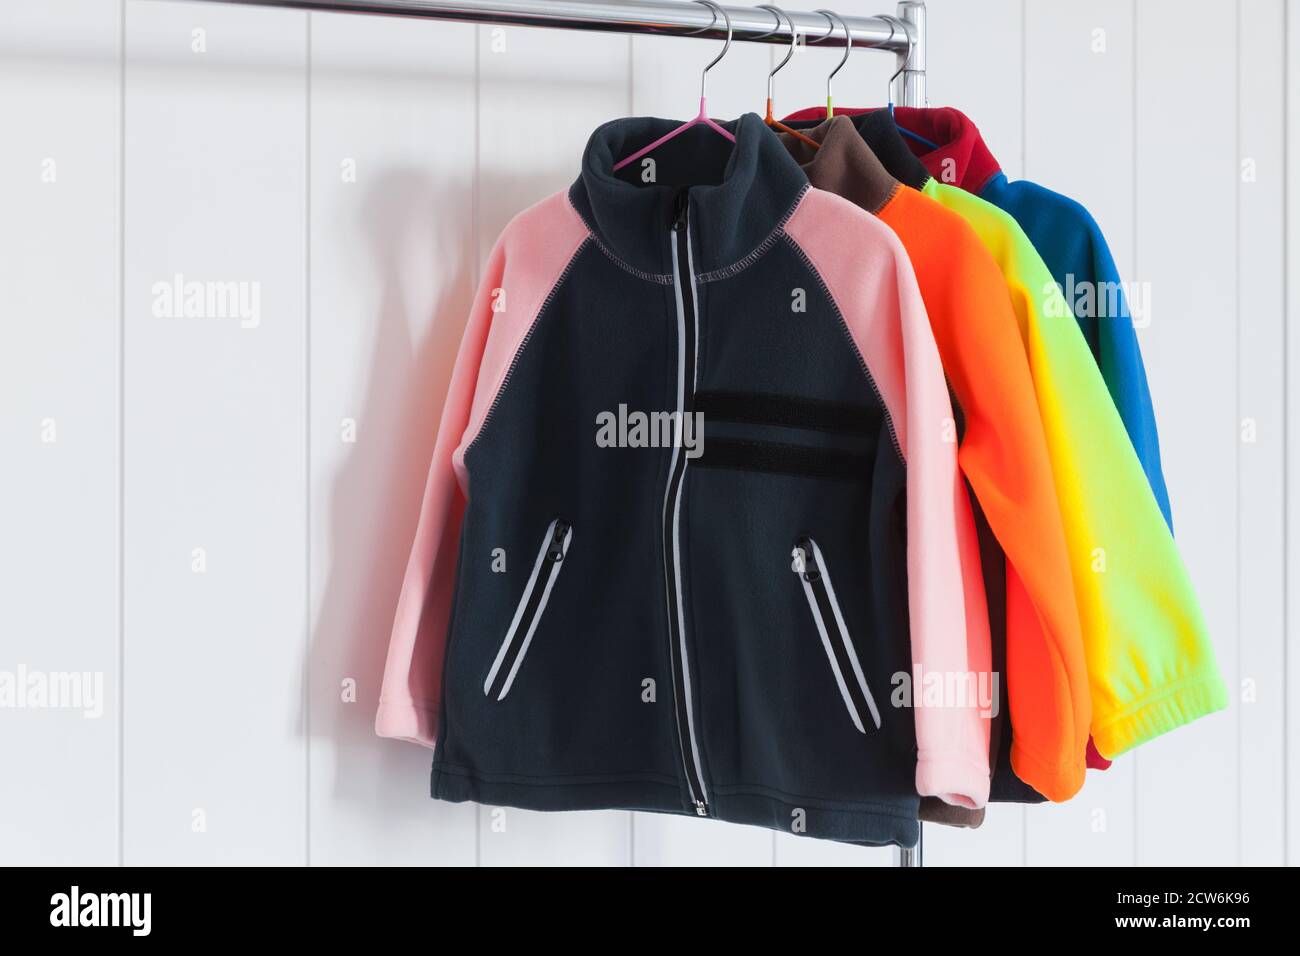 Colorful fleece jackets are hanging on hangers near white wall Stock Photo